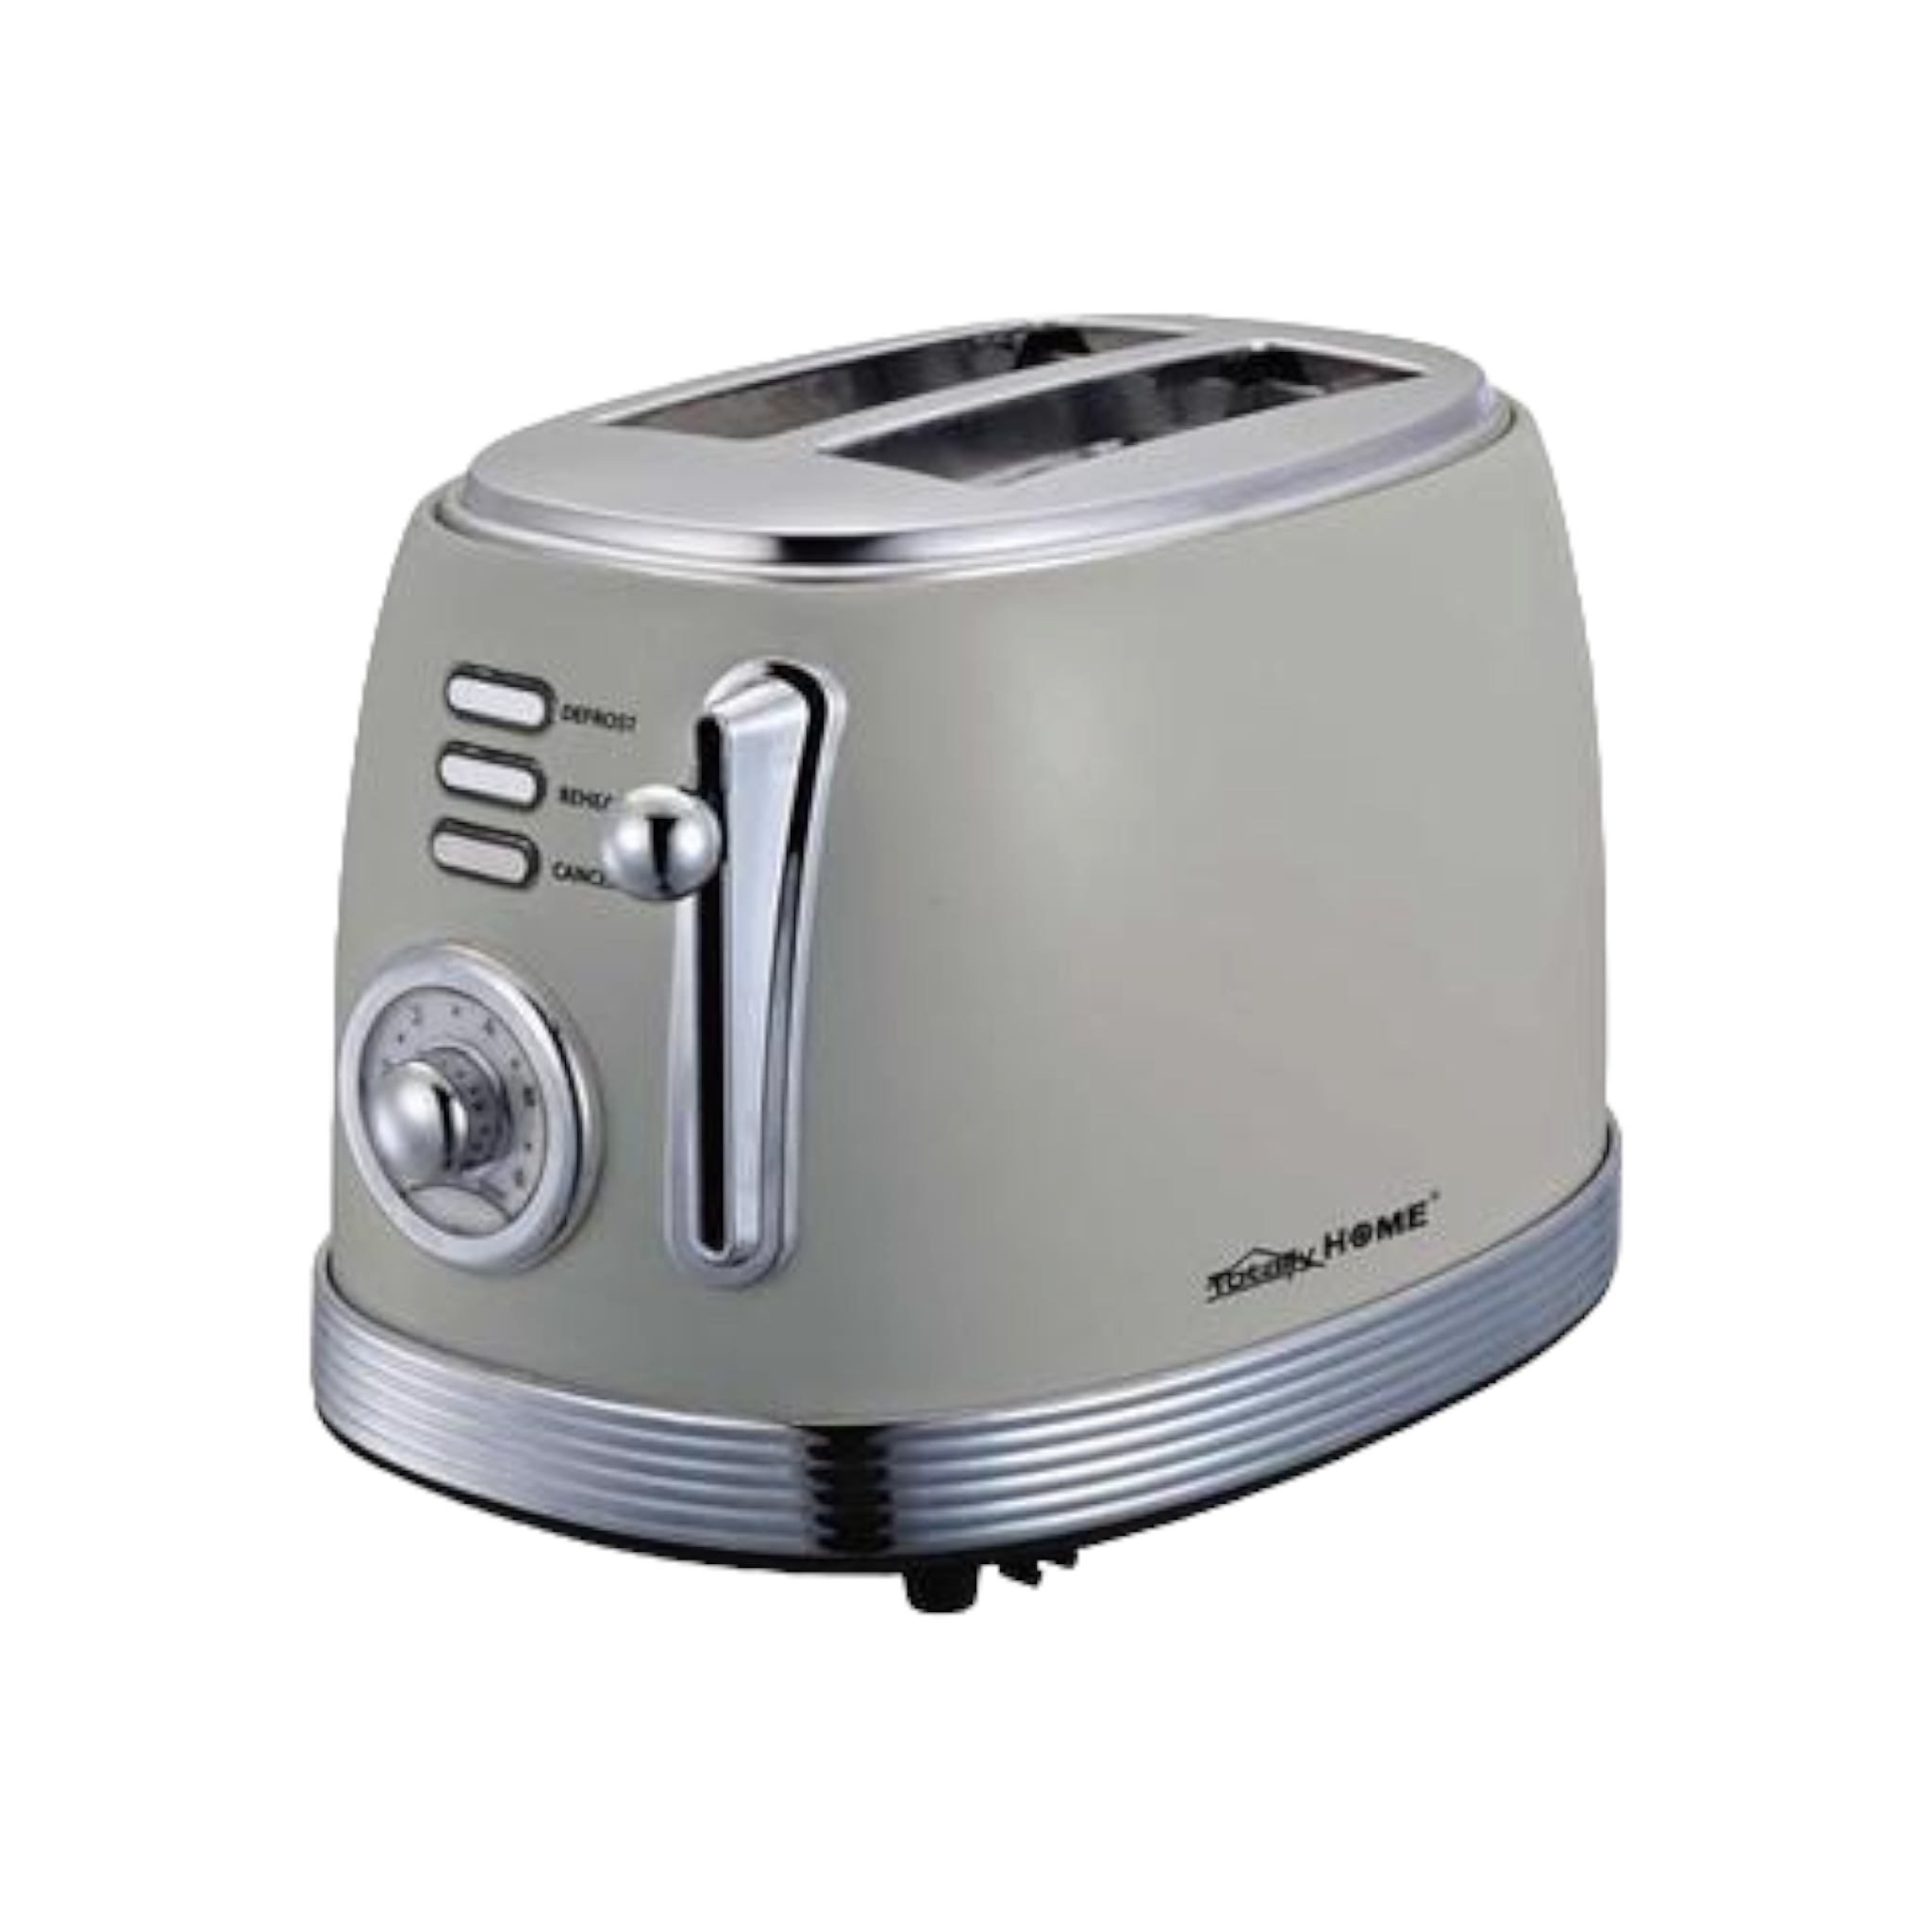 Totally Home 2-Slice Oval Toaster